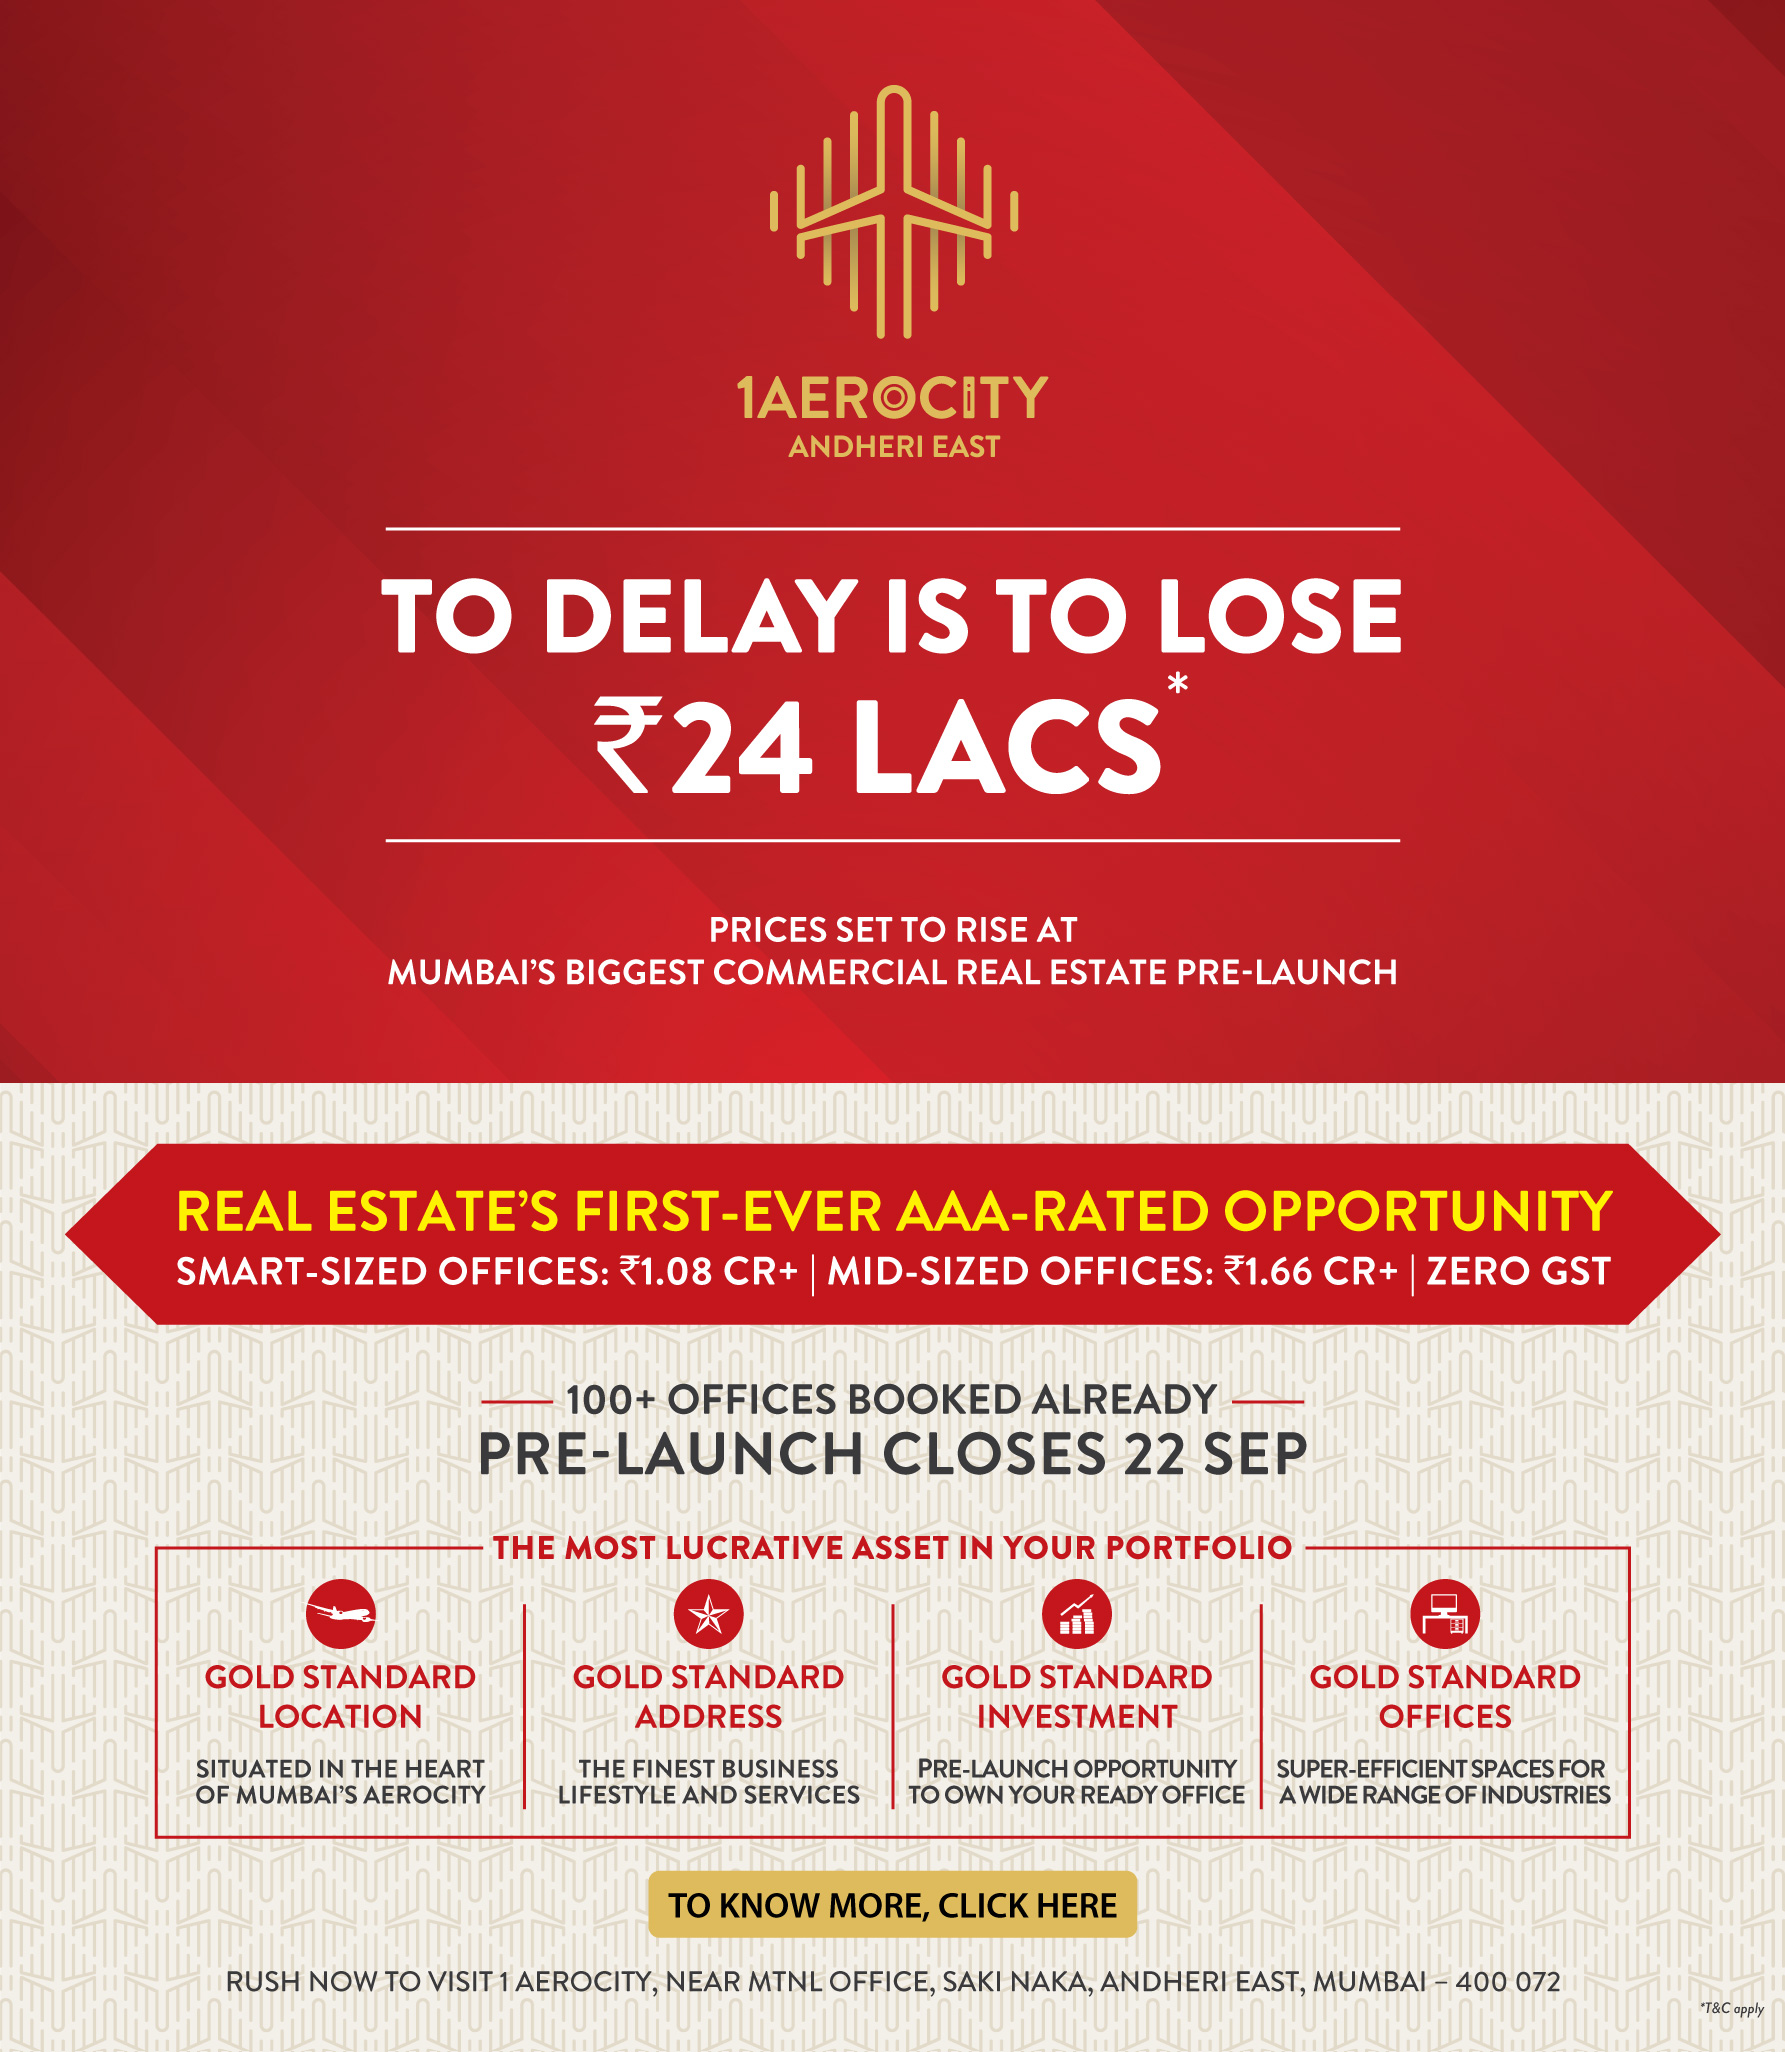 TO DELAY IS TO LOSE Rs.24 LACS*